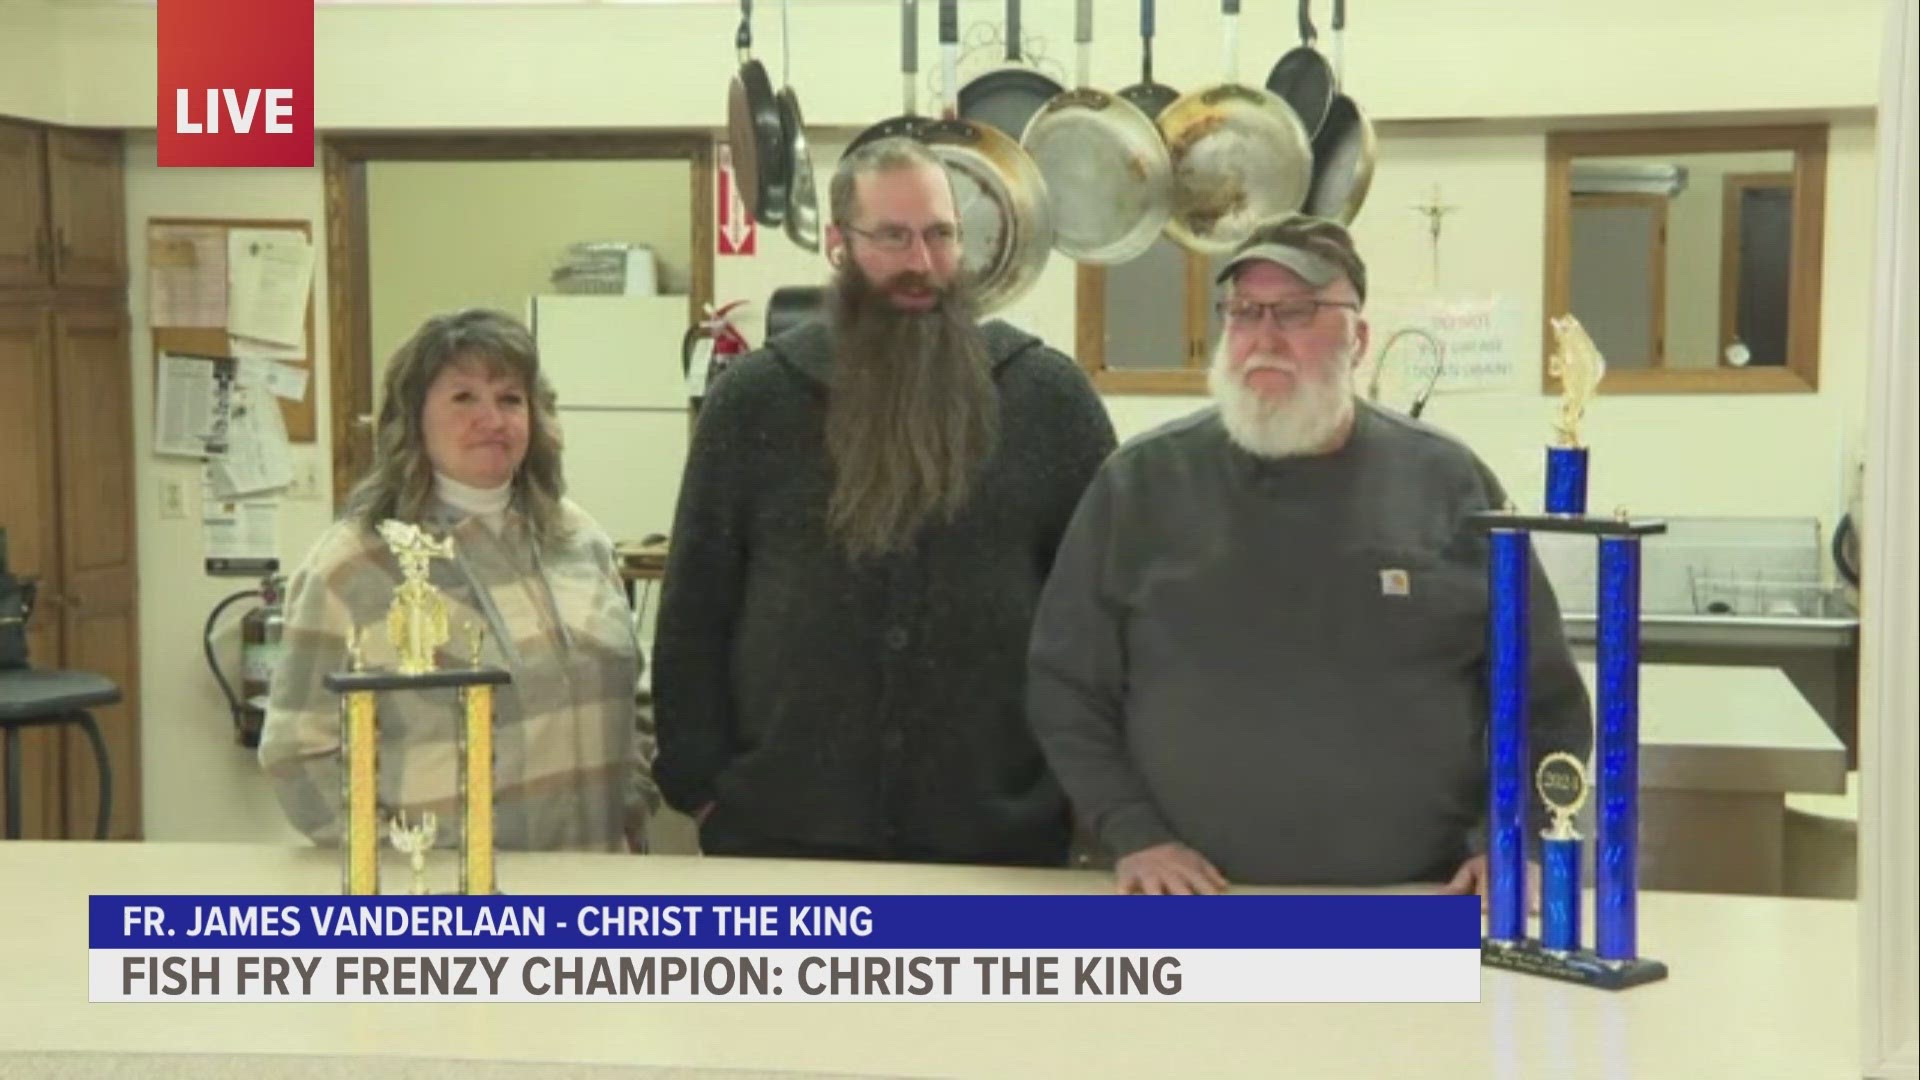 The Christ the King parish in Howard City has taken home their second Fish Fry Frenzy title!